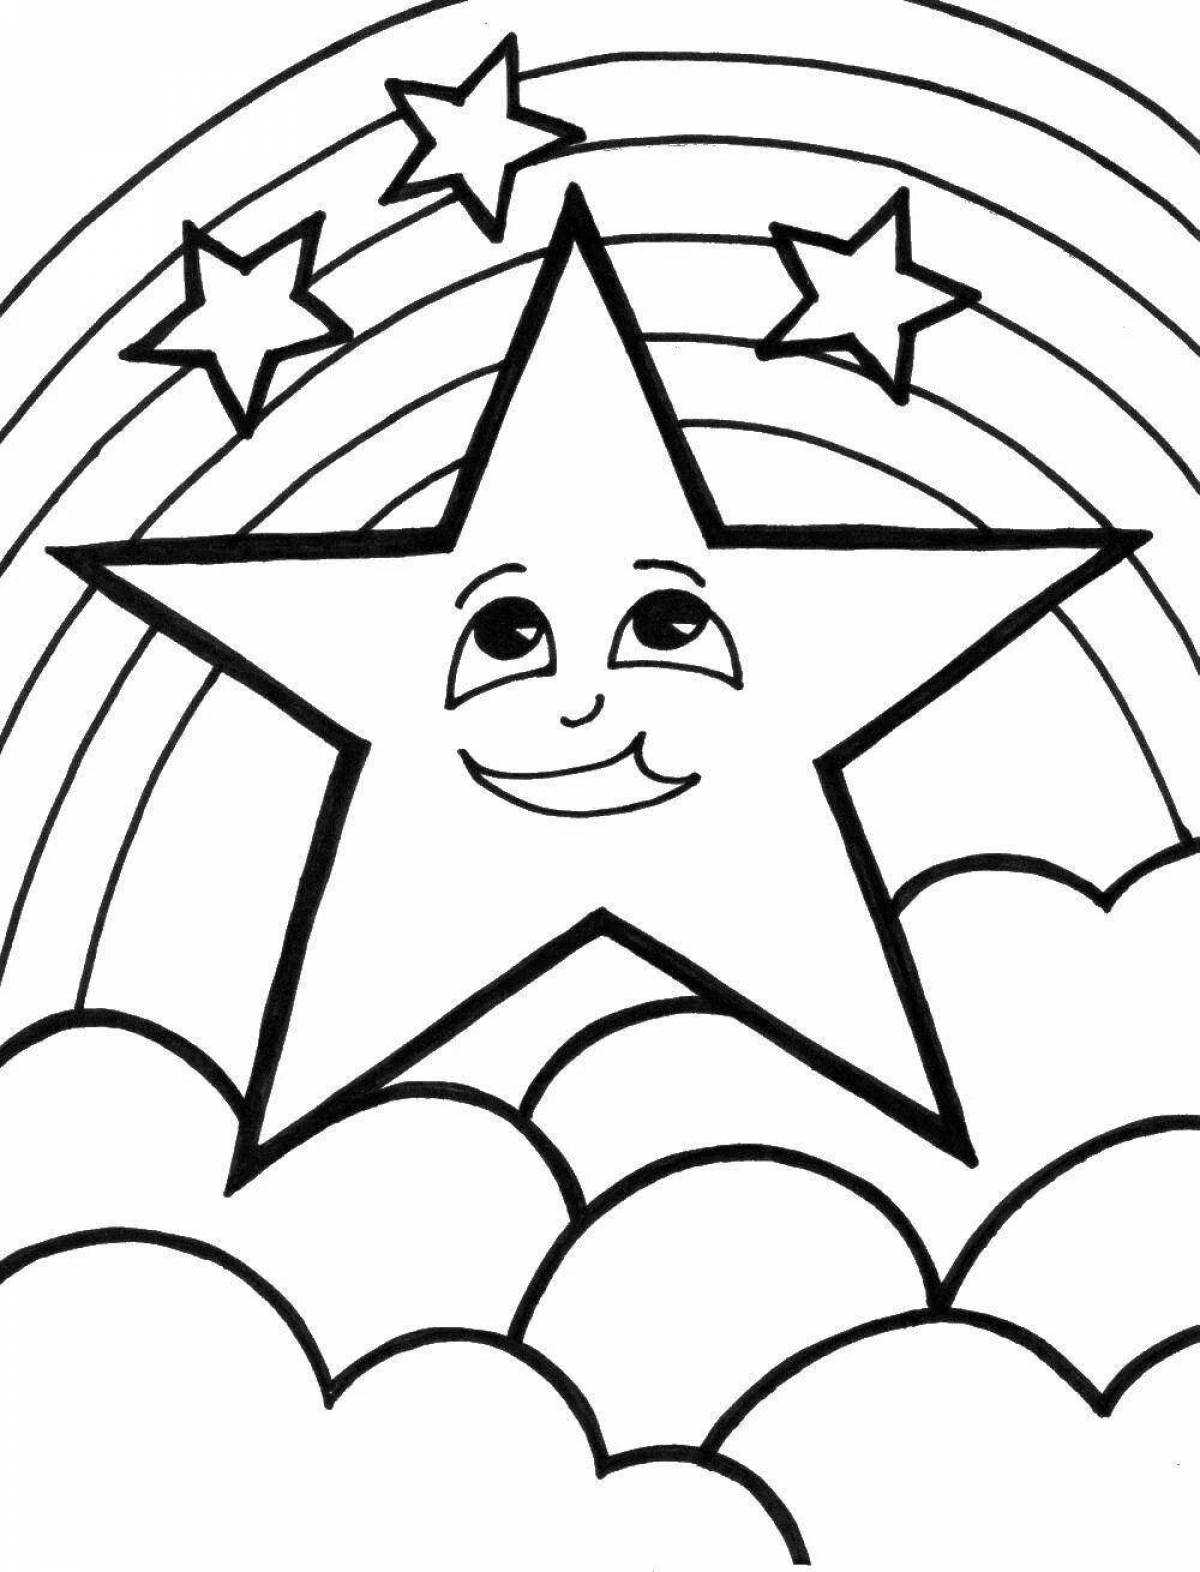 Interesting coloring picture star pattern